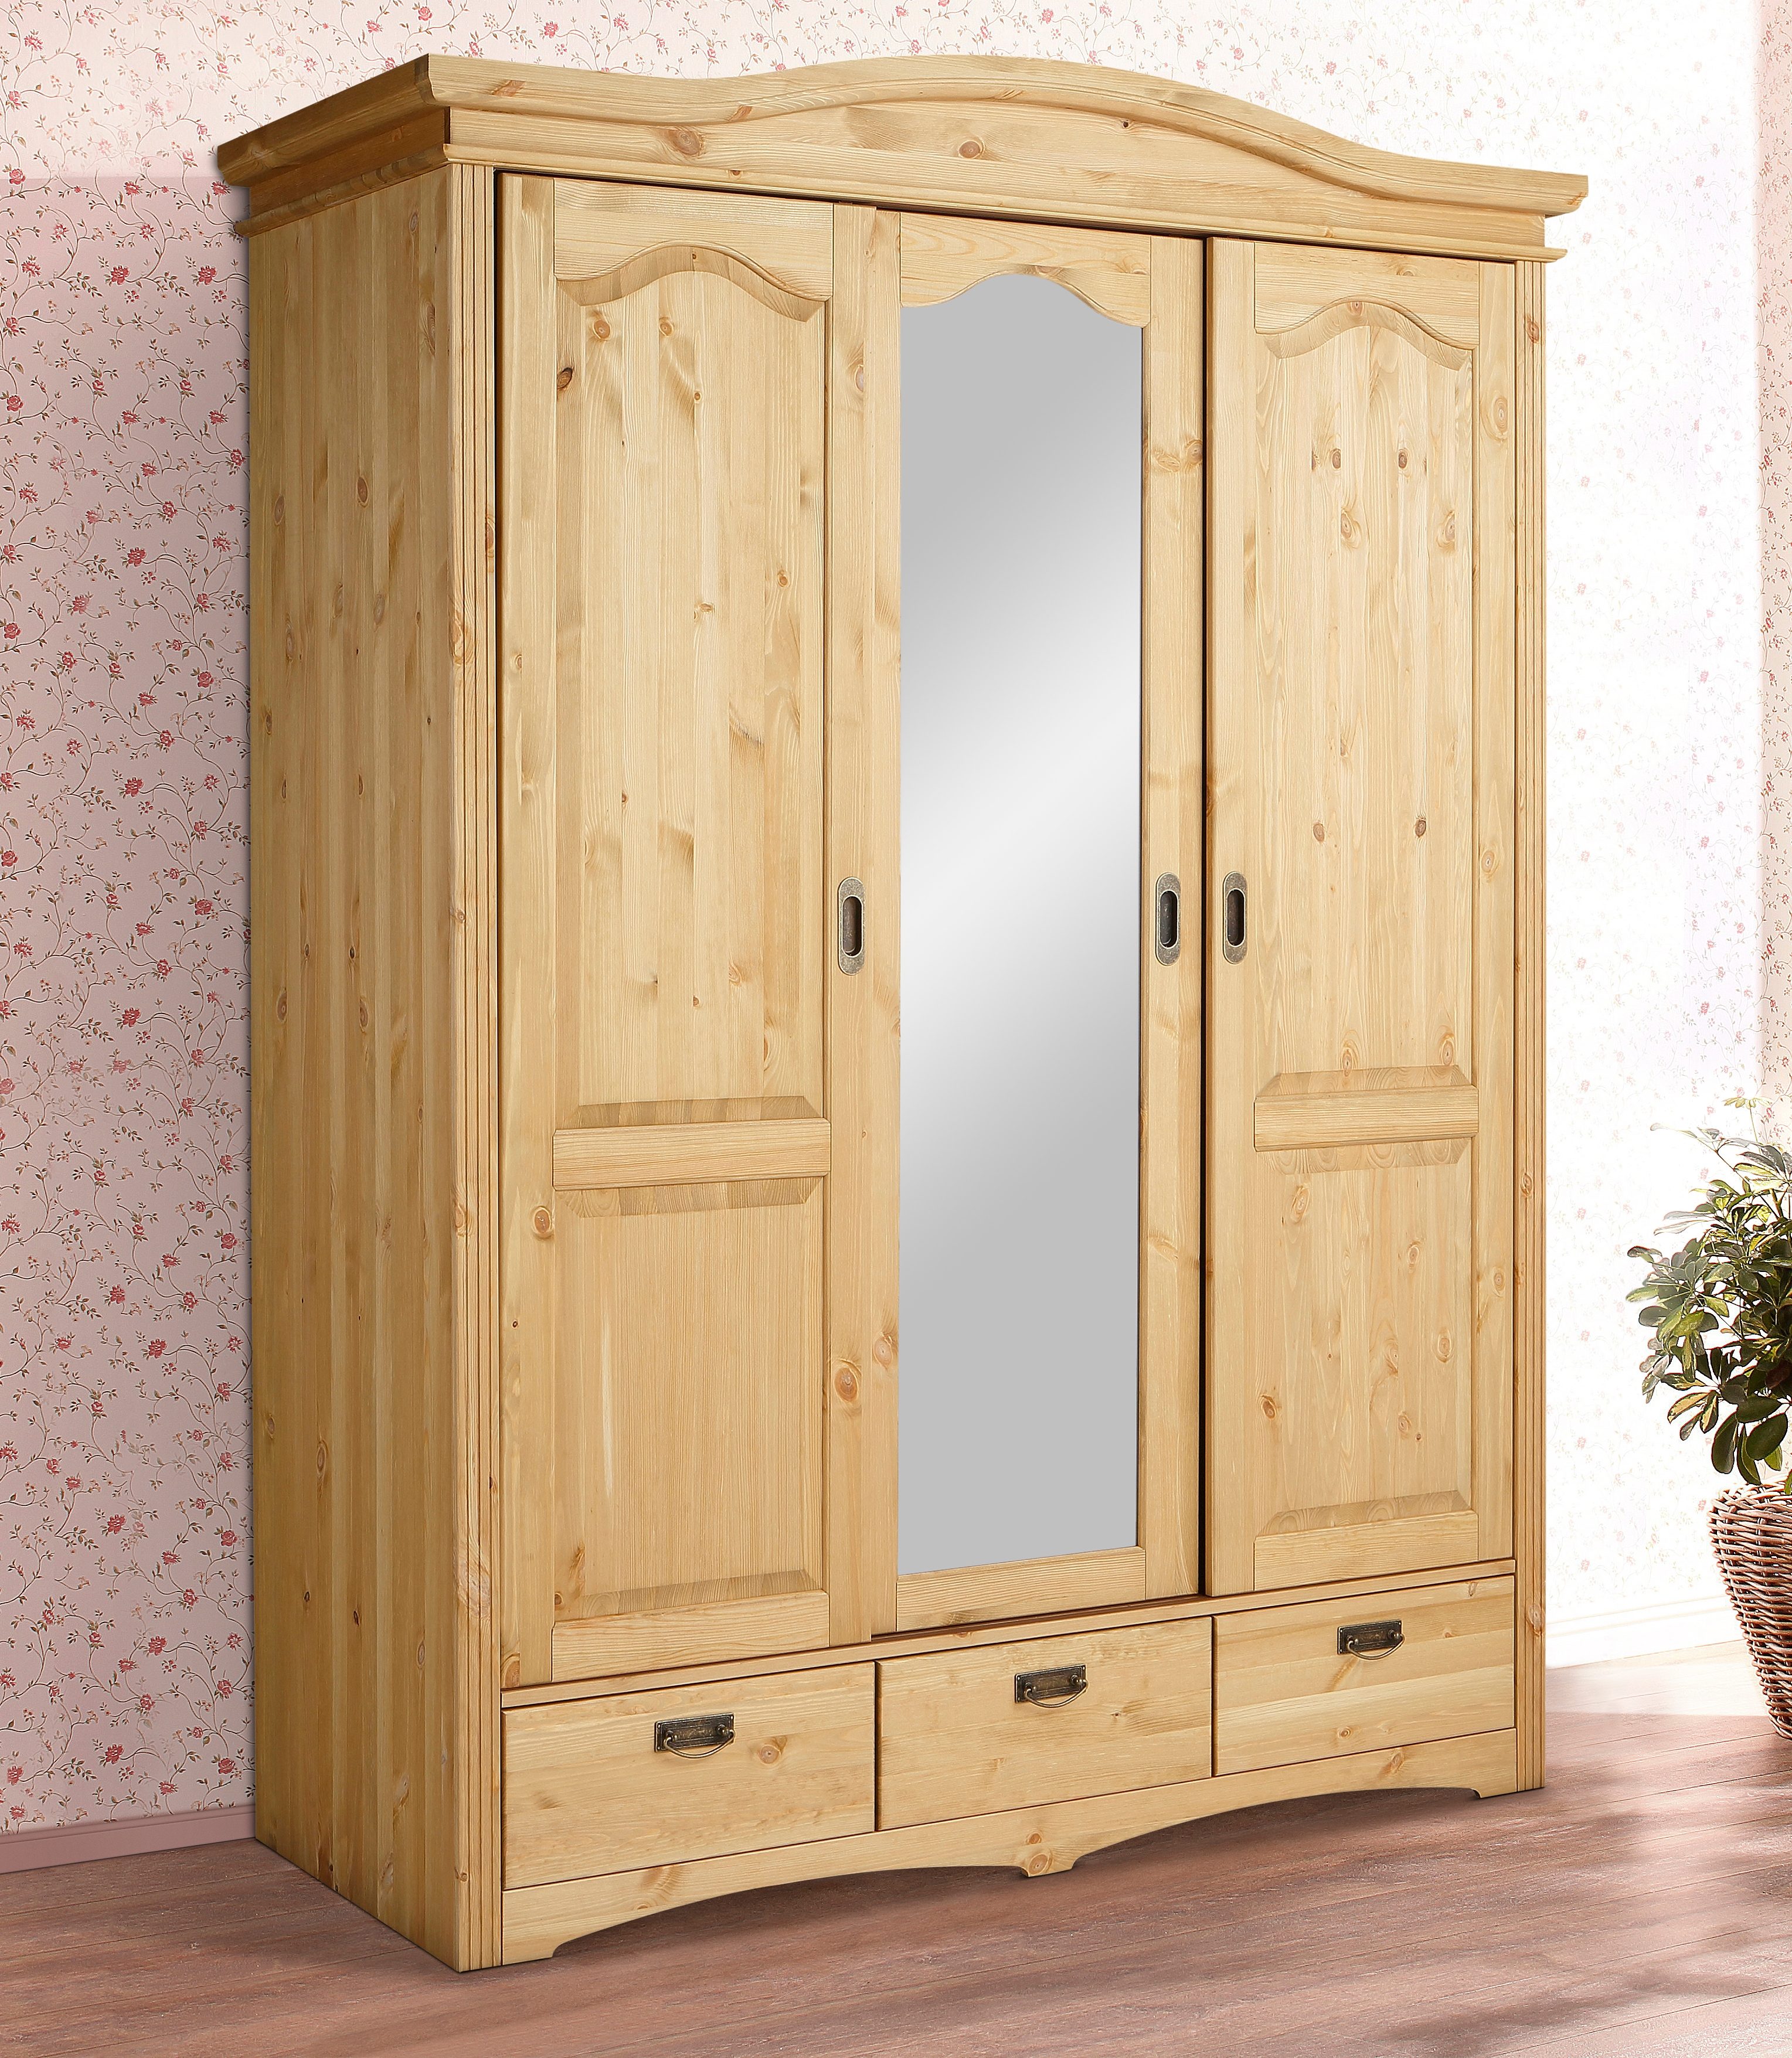 Pine wardrobe - light and practical